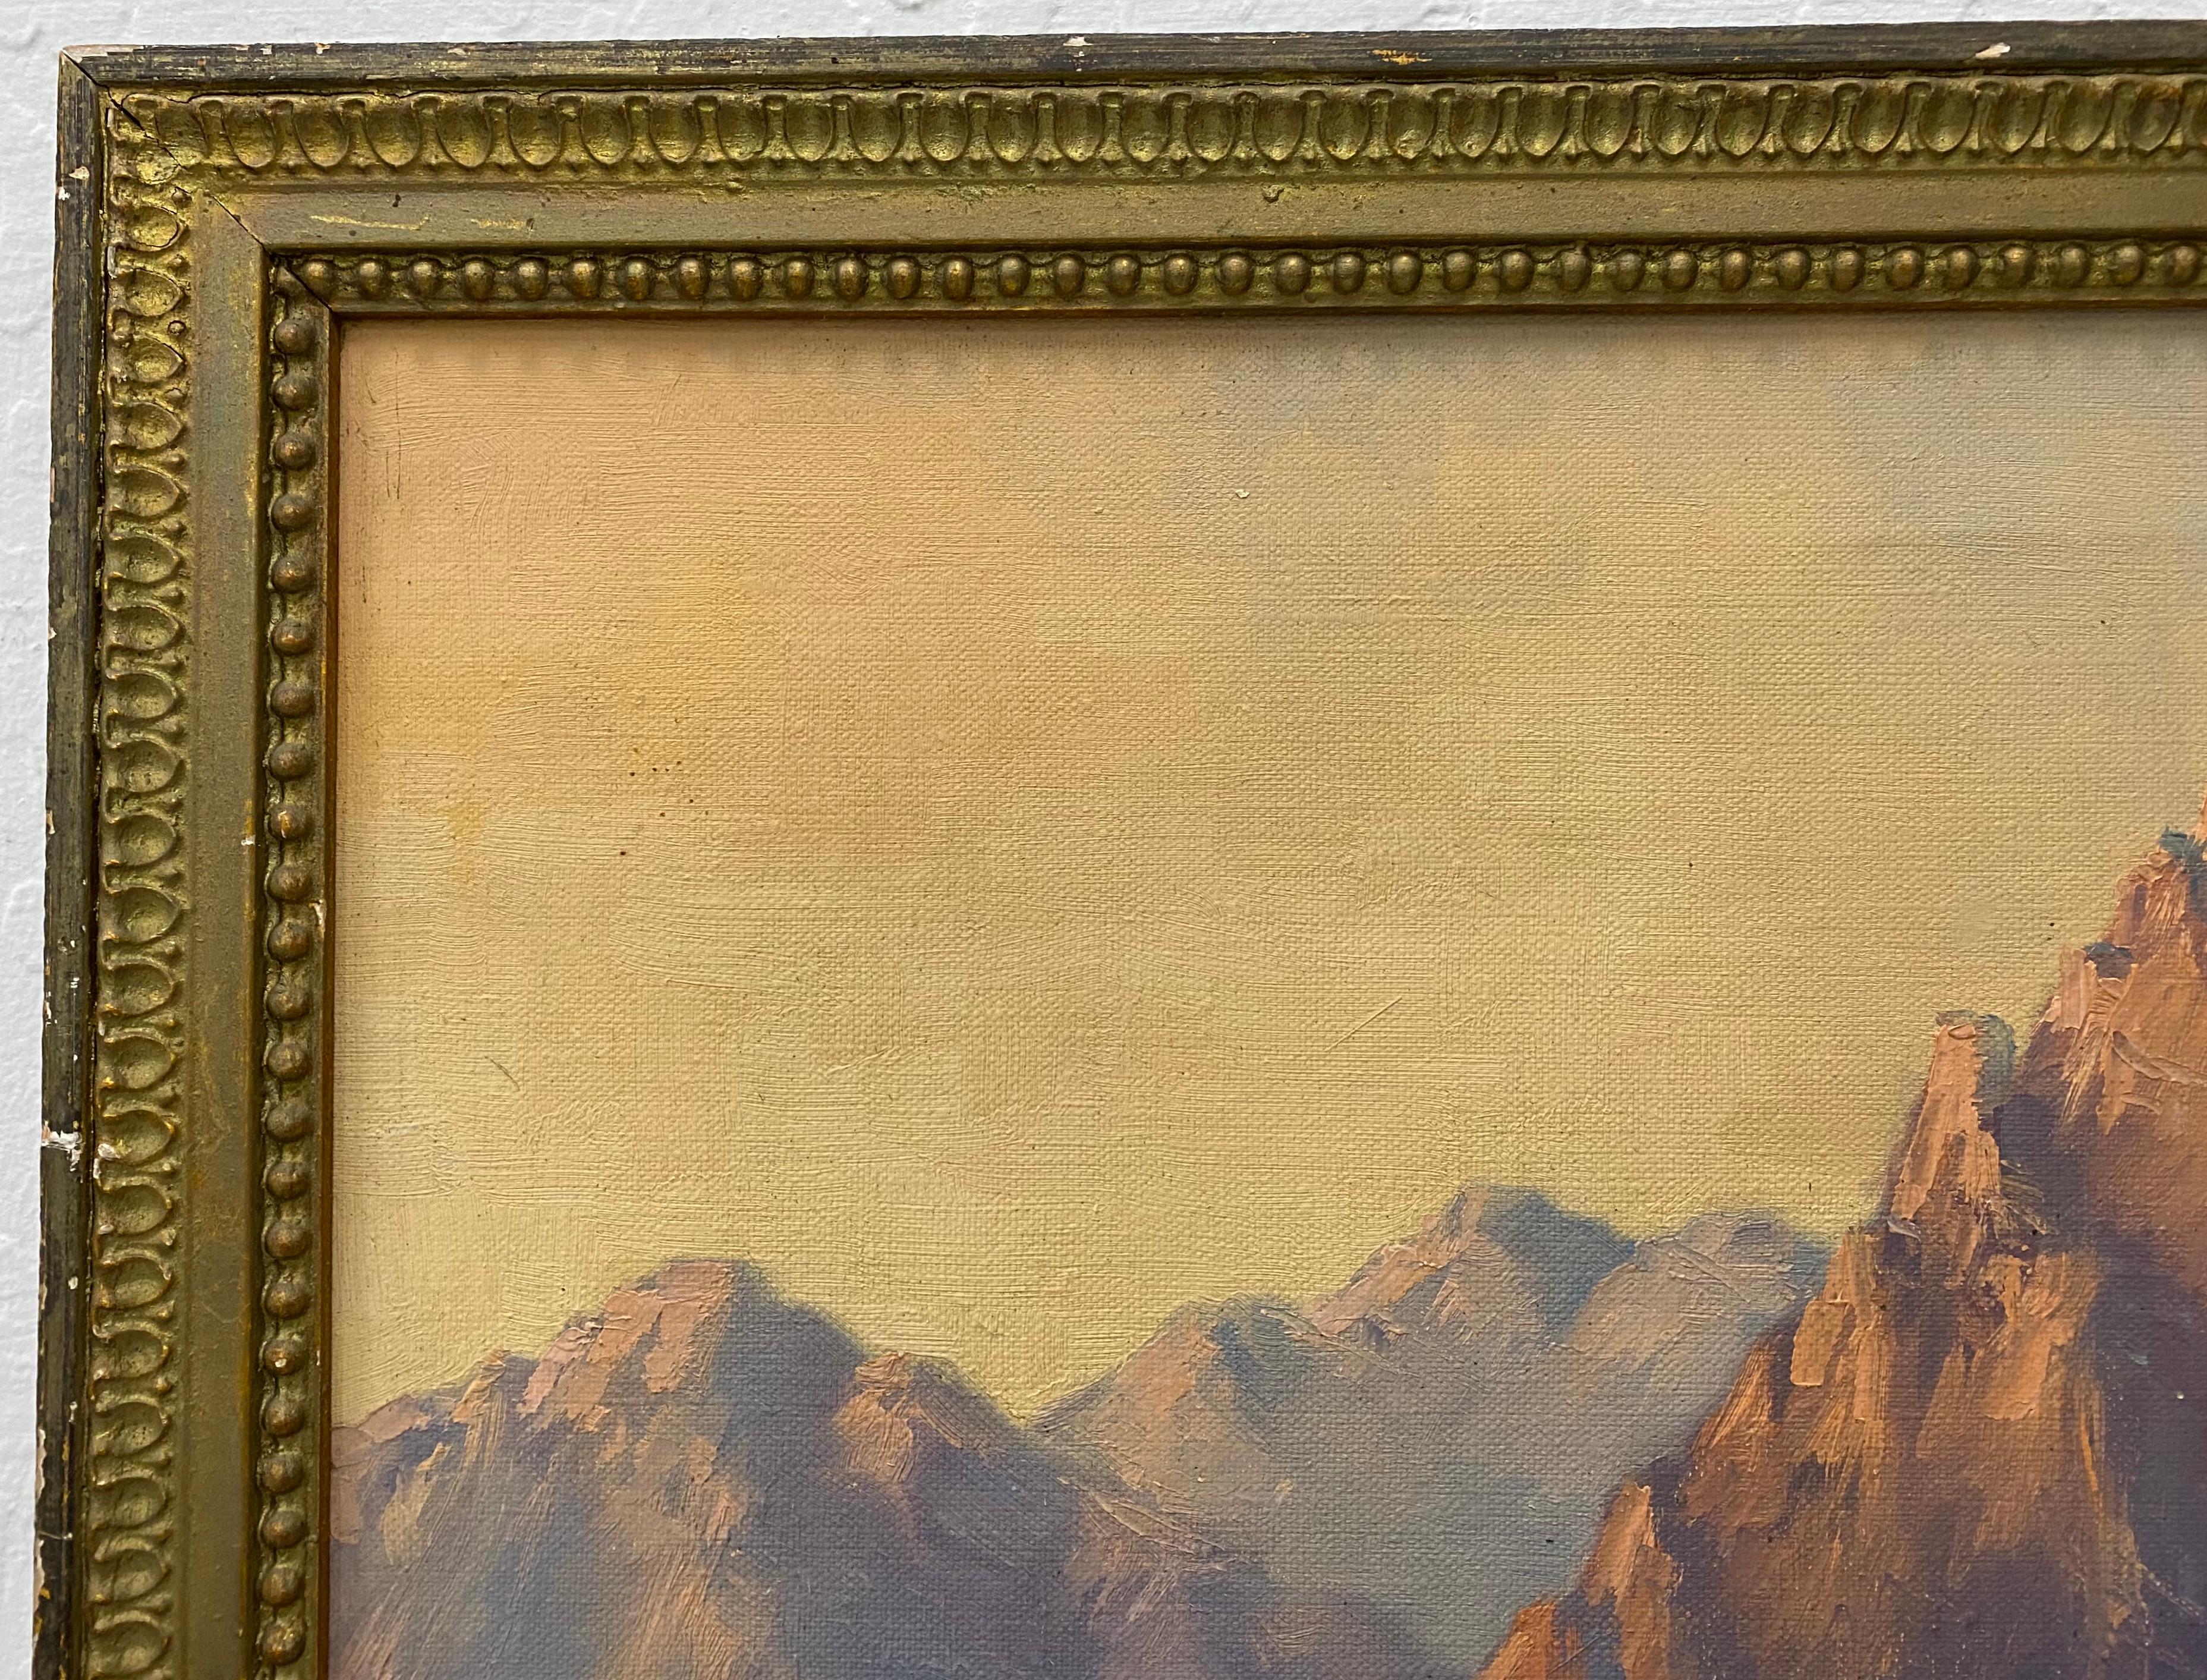 Majestic Mountain Landscape Oil Painting c.1940 - Brown Landscape Painting by Unknown